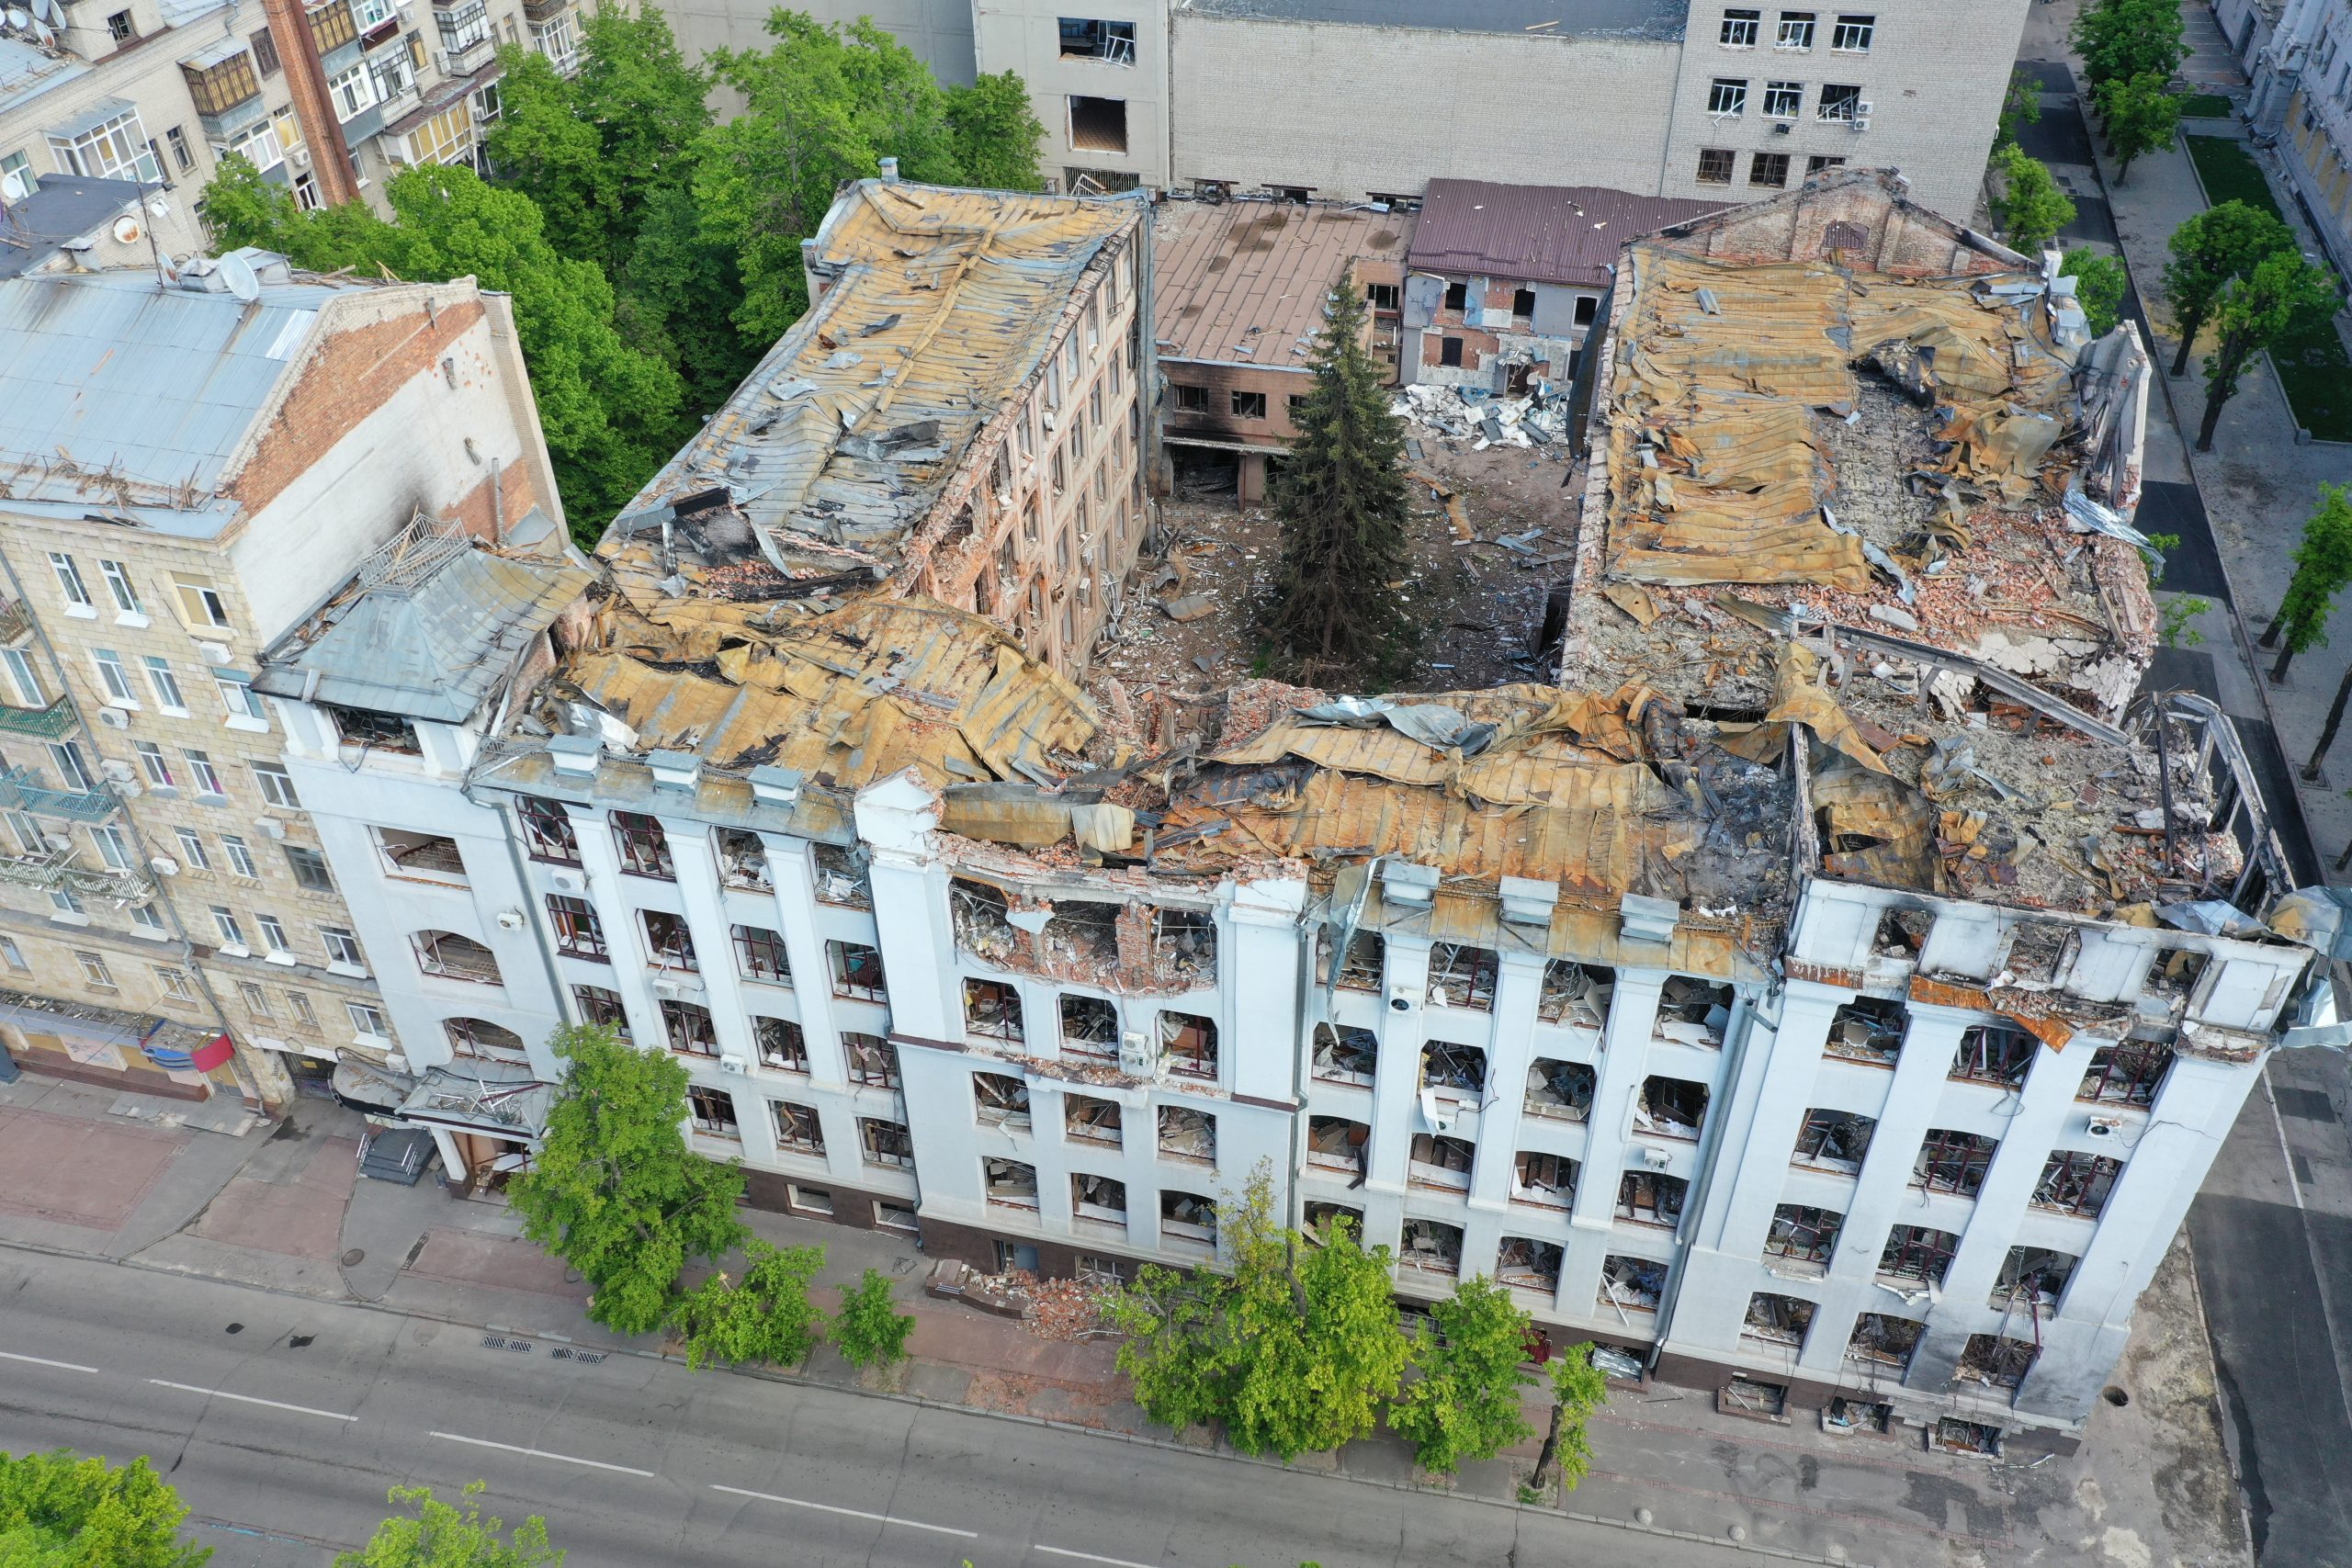 The building of the Faculty of Economics of the Karazin Kharkiv National University (a leading Ukrainian university founded in 1805) damaged by a Russian missile on March 2, 2022. The whole University works only via distance learning due to security conditions and damages to the various buildings. As seen from the drone on May 13, 2022. Photographer: Yevhen Tytarenko